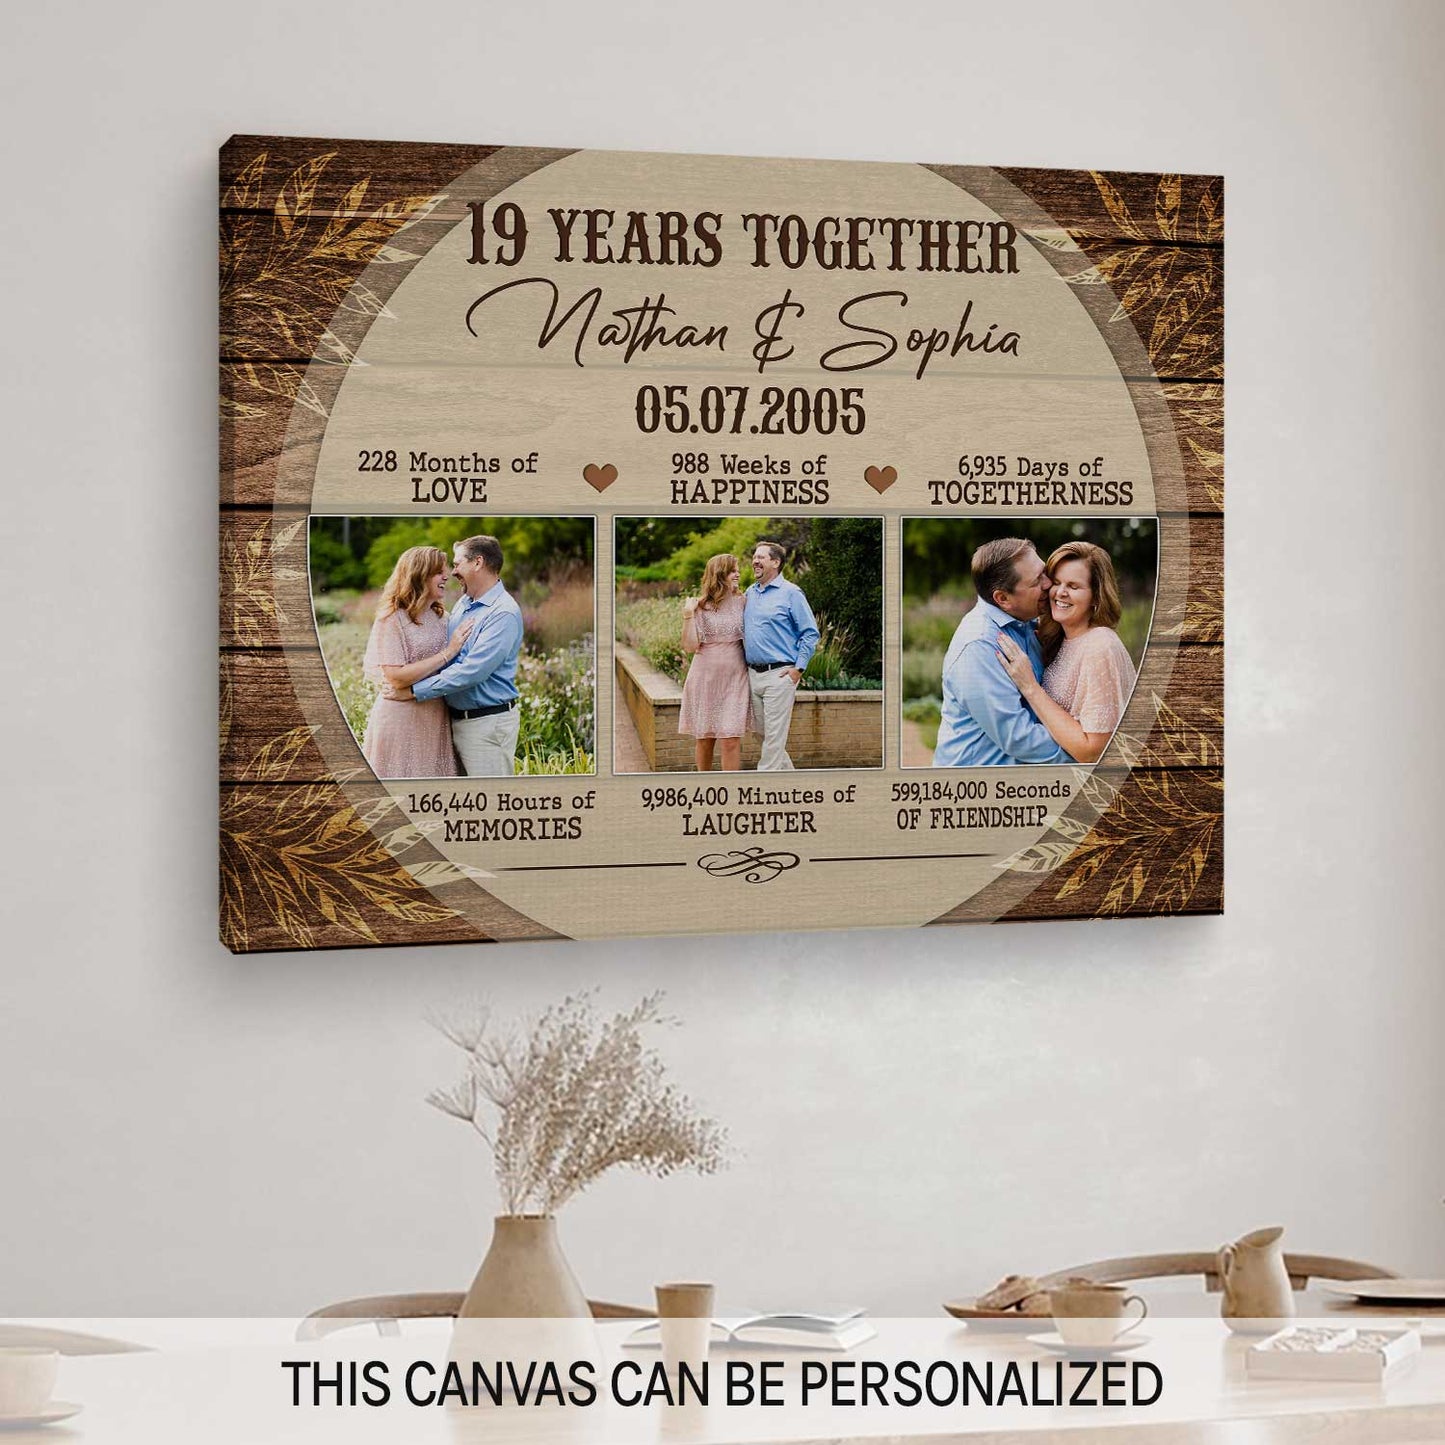 19 Years Together - Personalized 19 Year Anniversary gift For Husband or Wife - Custom Canvas Print - MyMindfulGifts